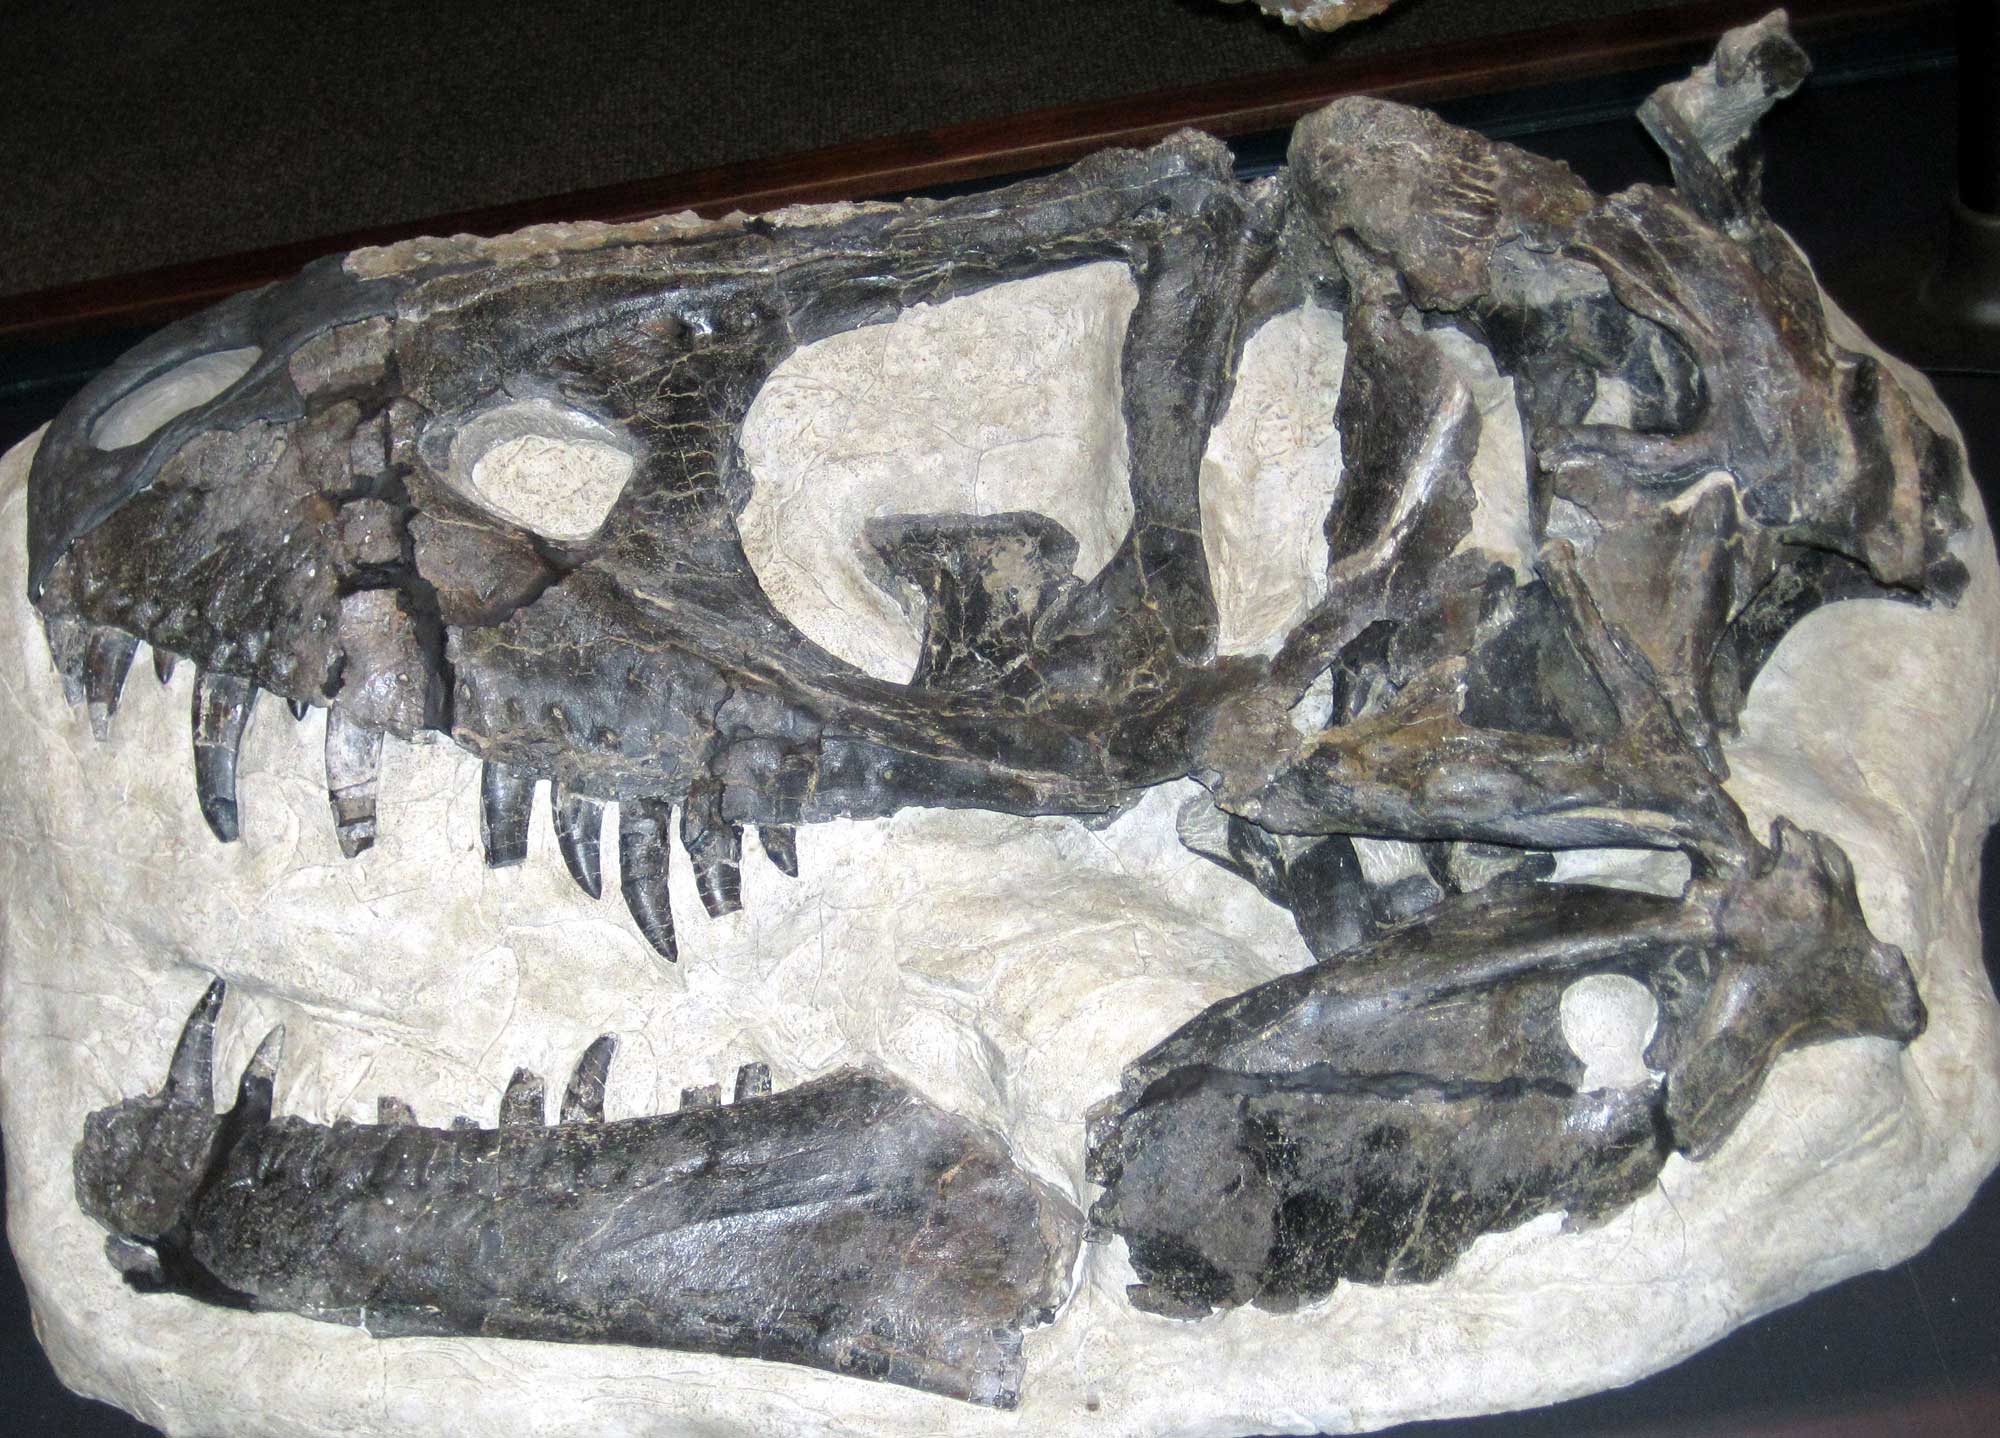 Skull of the predatory dinosaur Daspletosaurus from the Late Cretaceous Two Medicine Formation of Montana. The photo shows the skull in side view with the nose pointed to the left. The skull is robust with an open mount and large, slightly curving, pointed teeth. The skull is dark gray in color and partially embedded in off-white rock matrix.